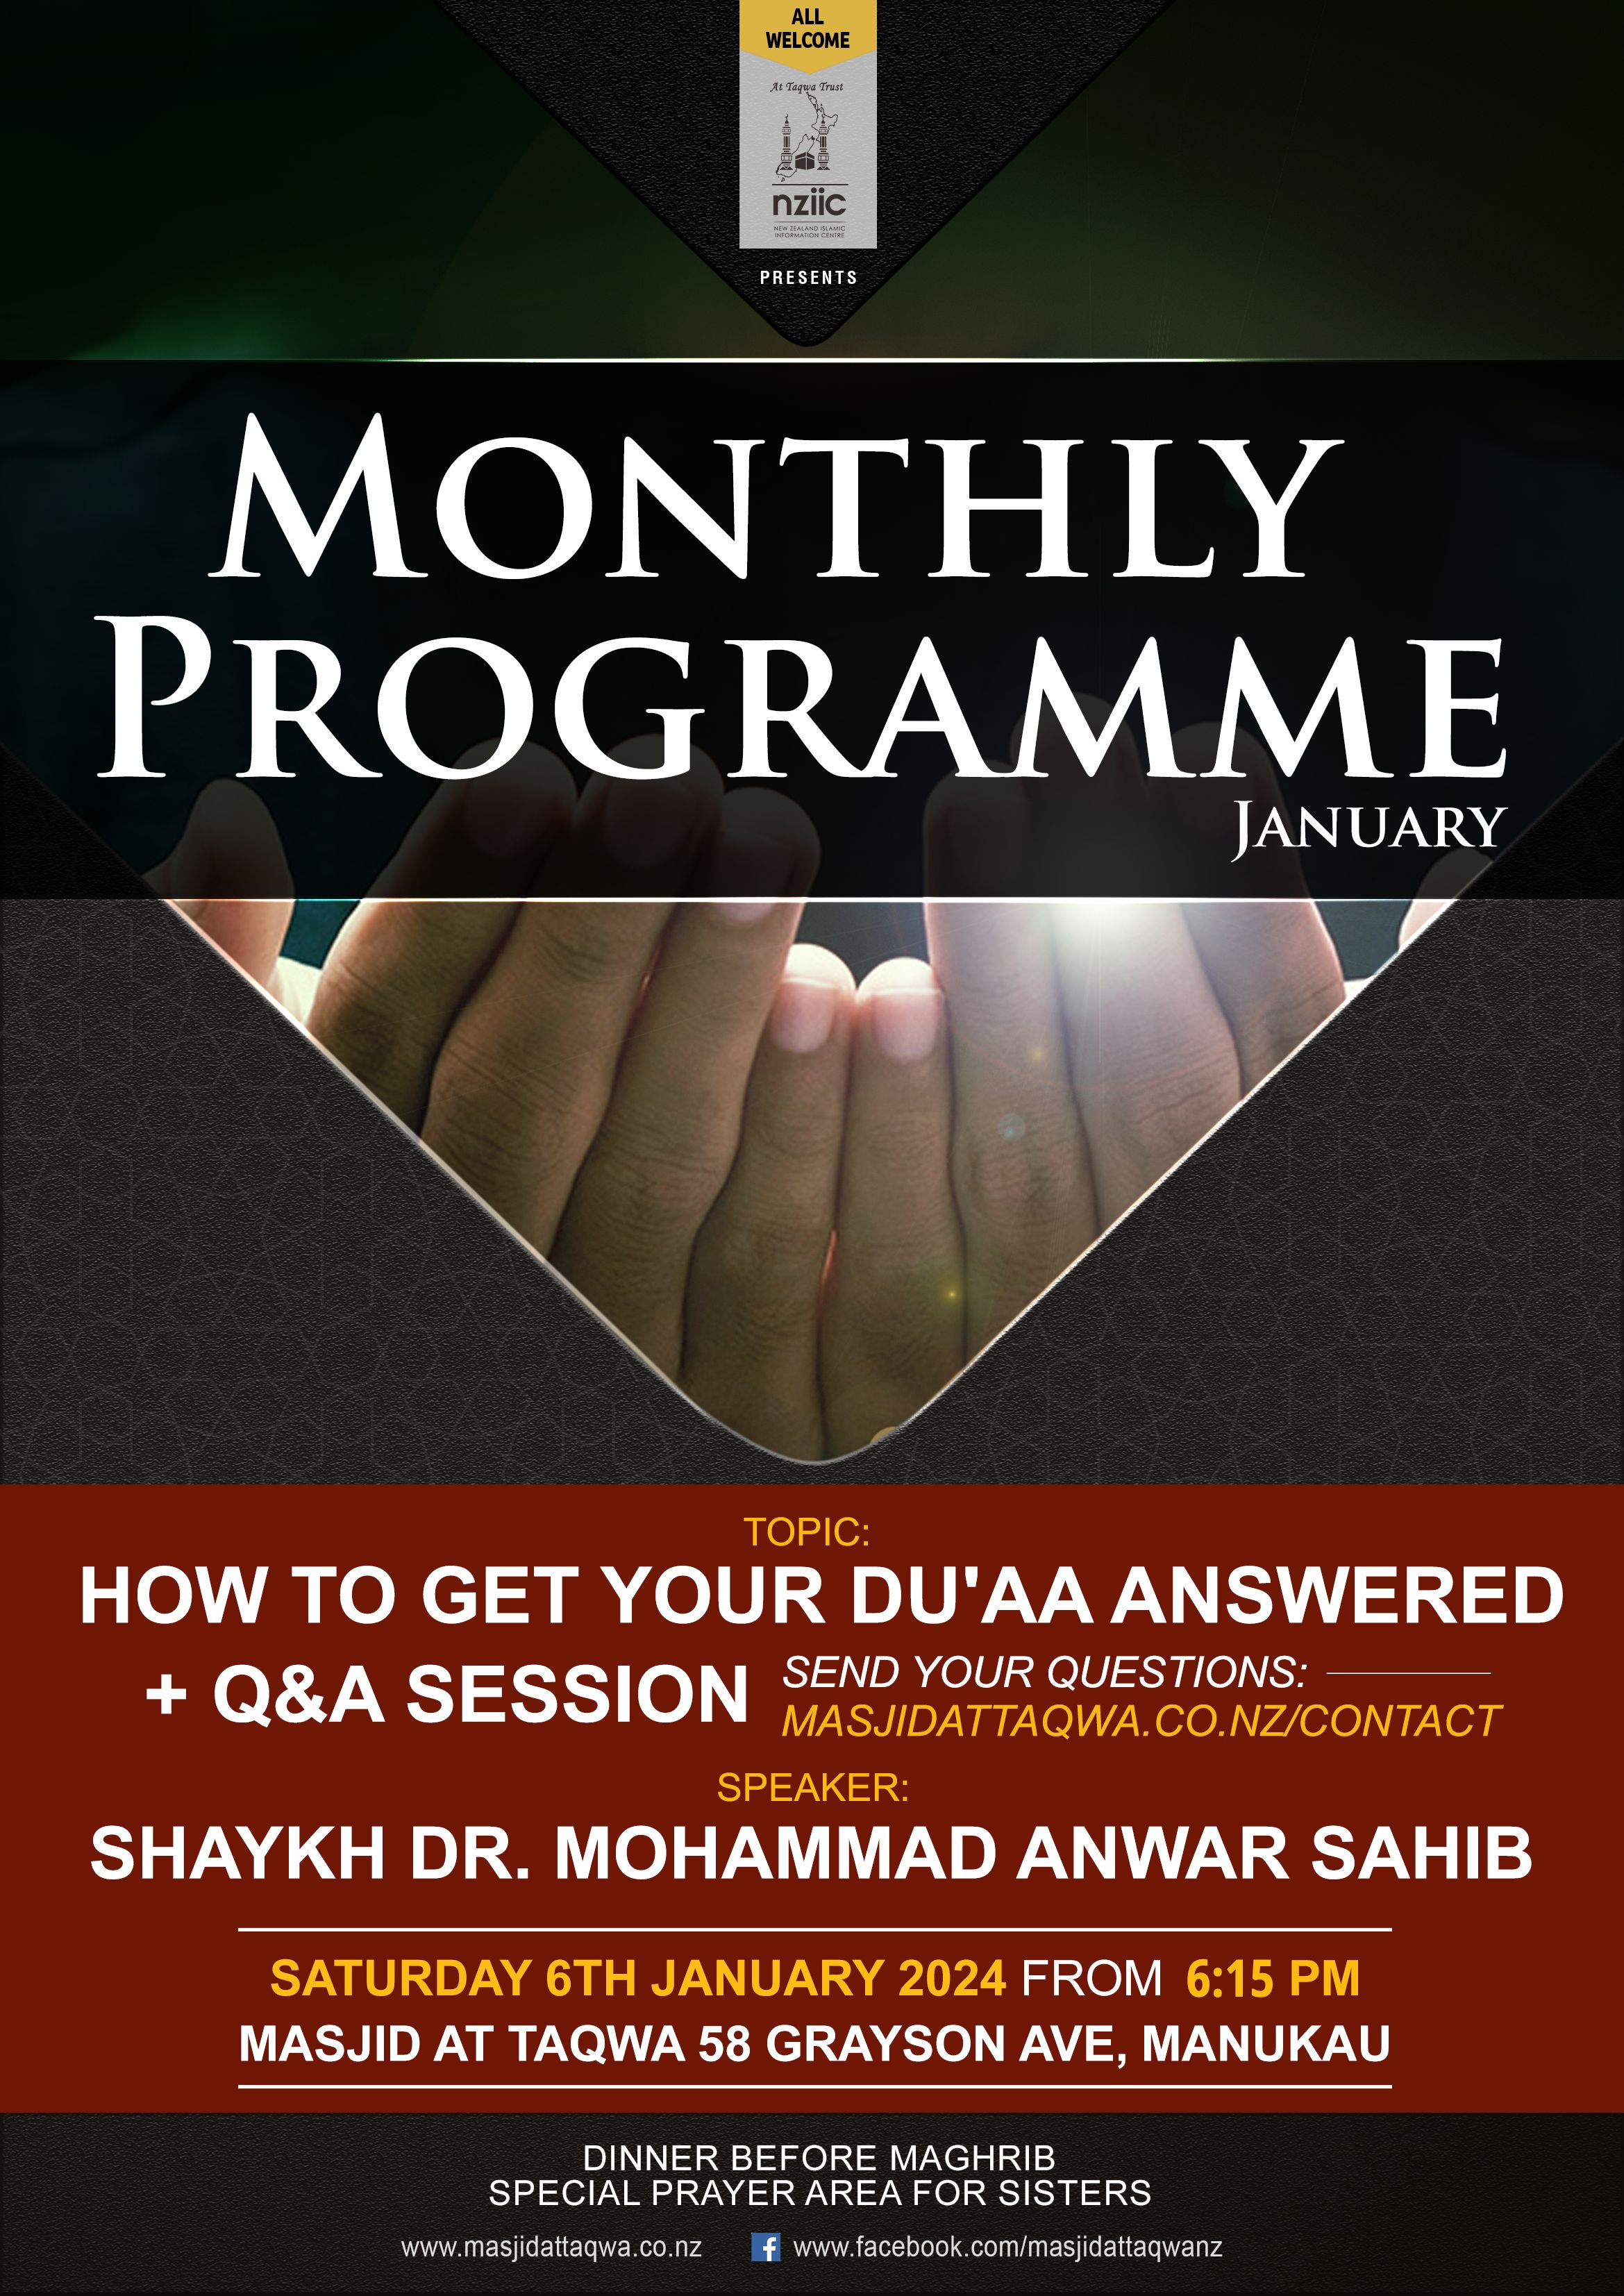 october-monthly-programme-how-get-dua-answered-poster